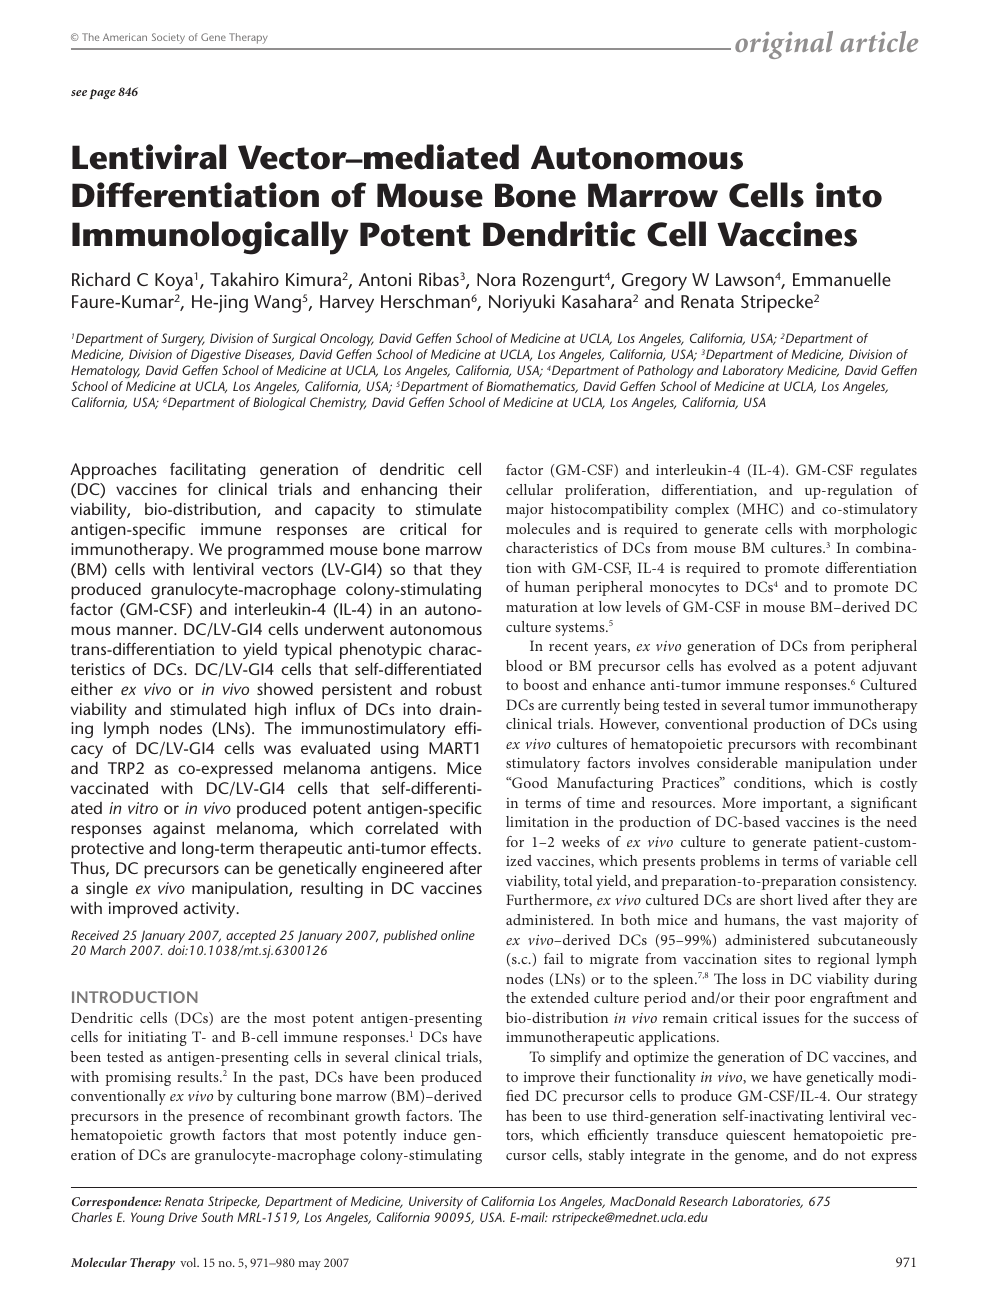 Lentiviral Vector Mediated Autonomous Differentiation Of Mouse Bone Marrow Cells Into Immunologically Potent Dendritic Cell Vaccines Topic Of Research Paper In Biological Sciences Download Scholarly Article Pdf And Read For Free On